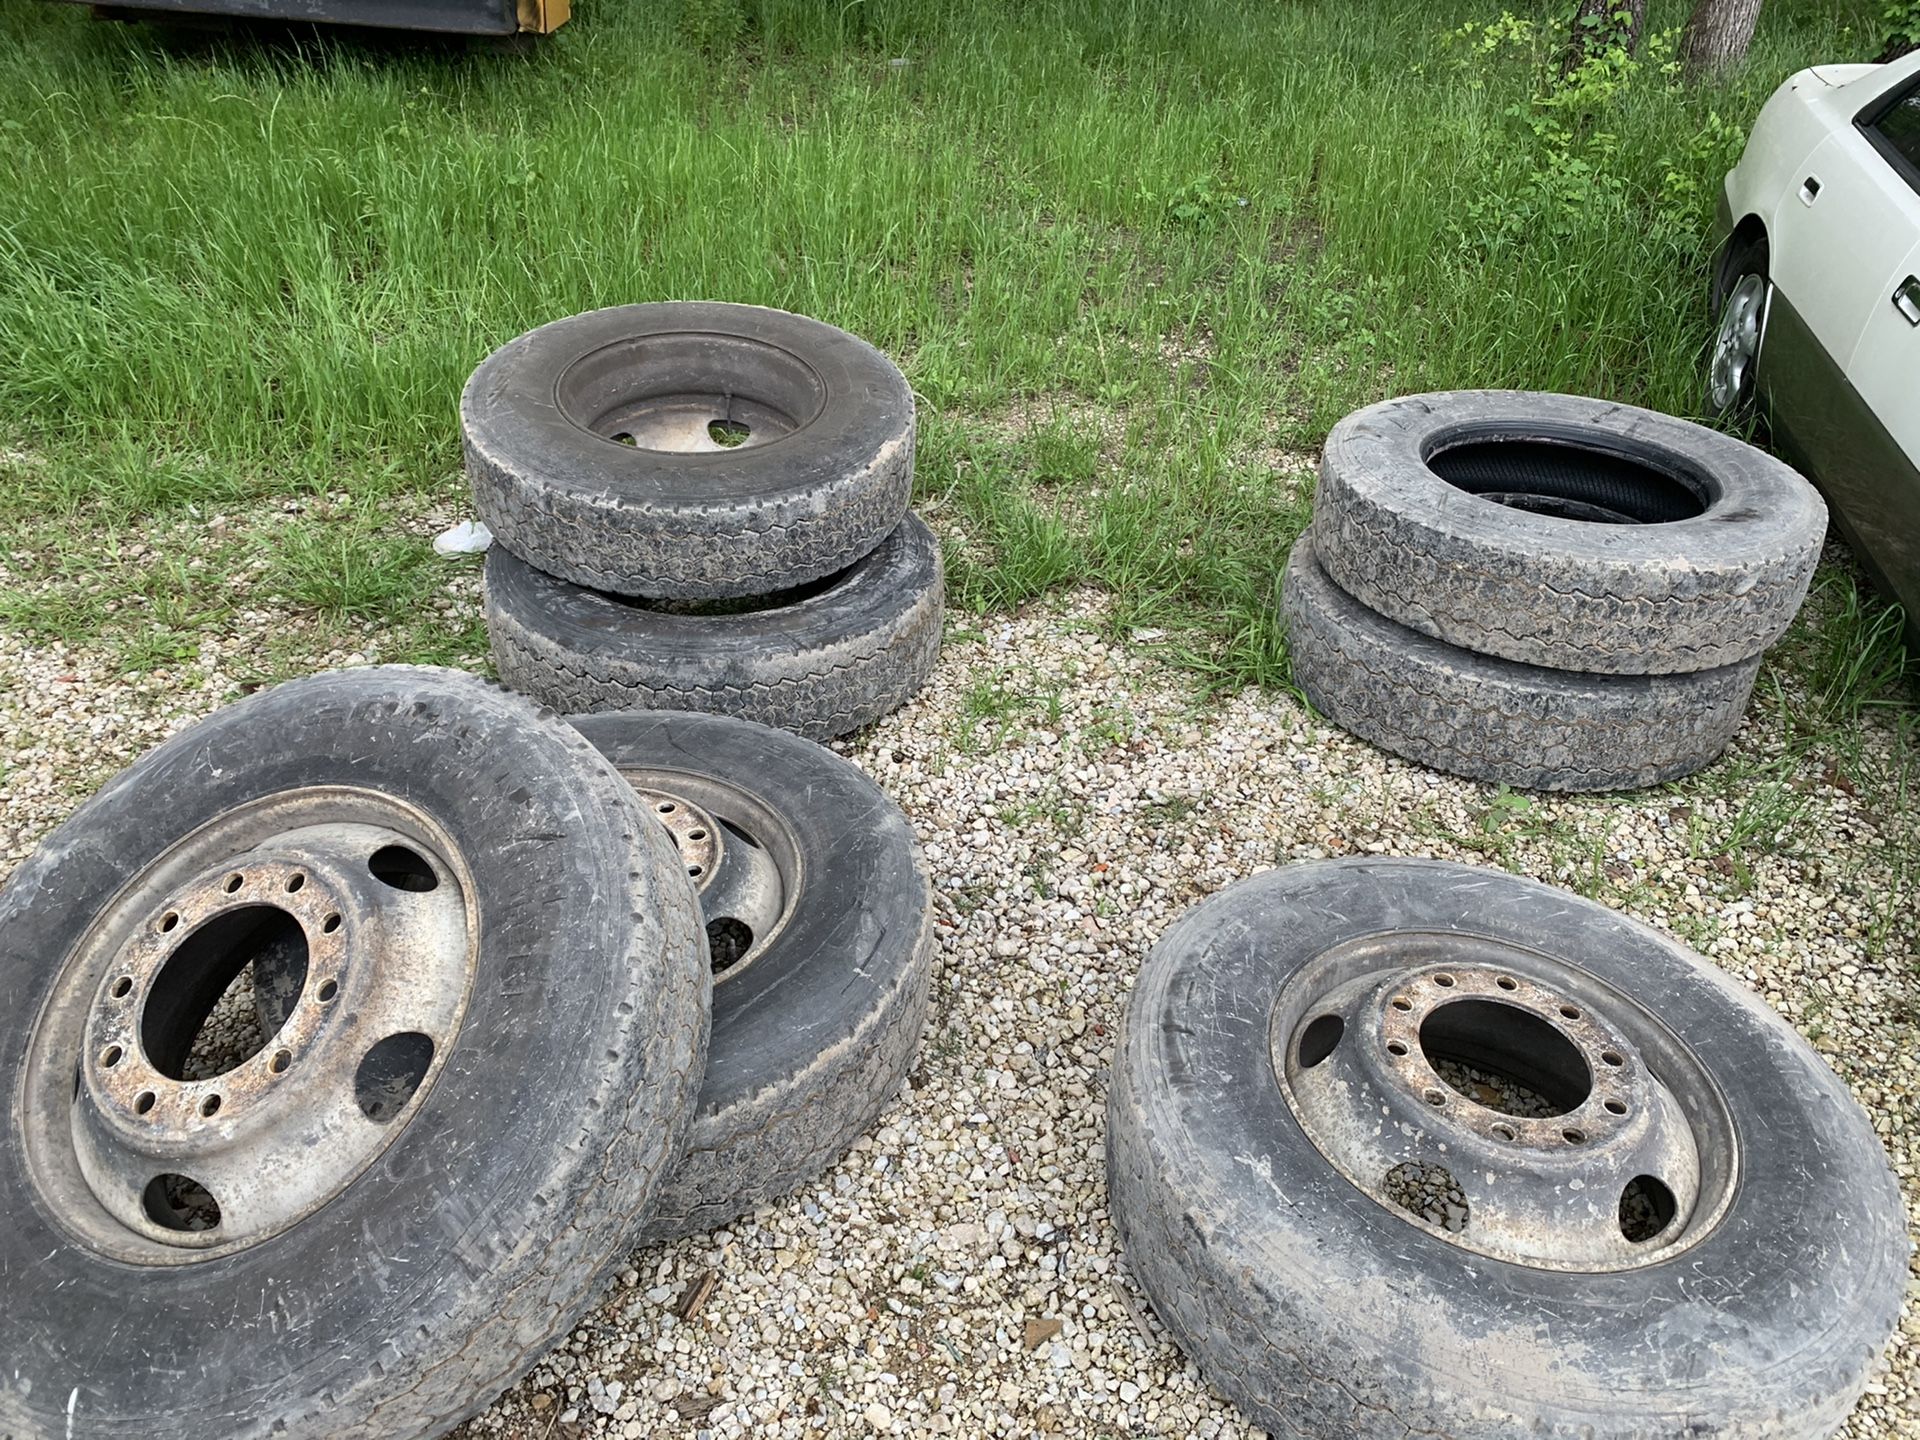 Tractor or trailer tires